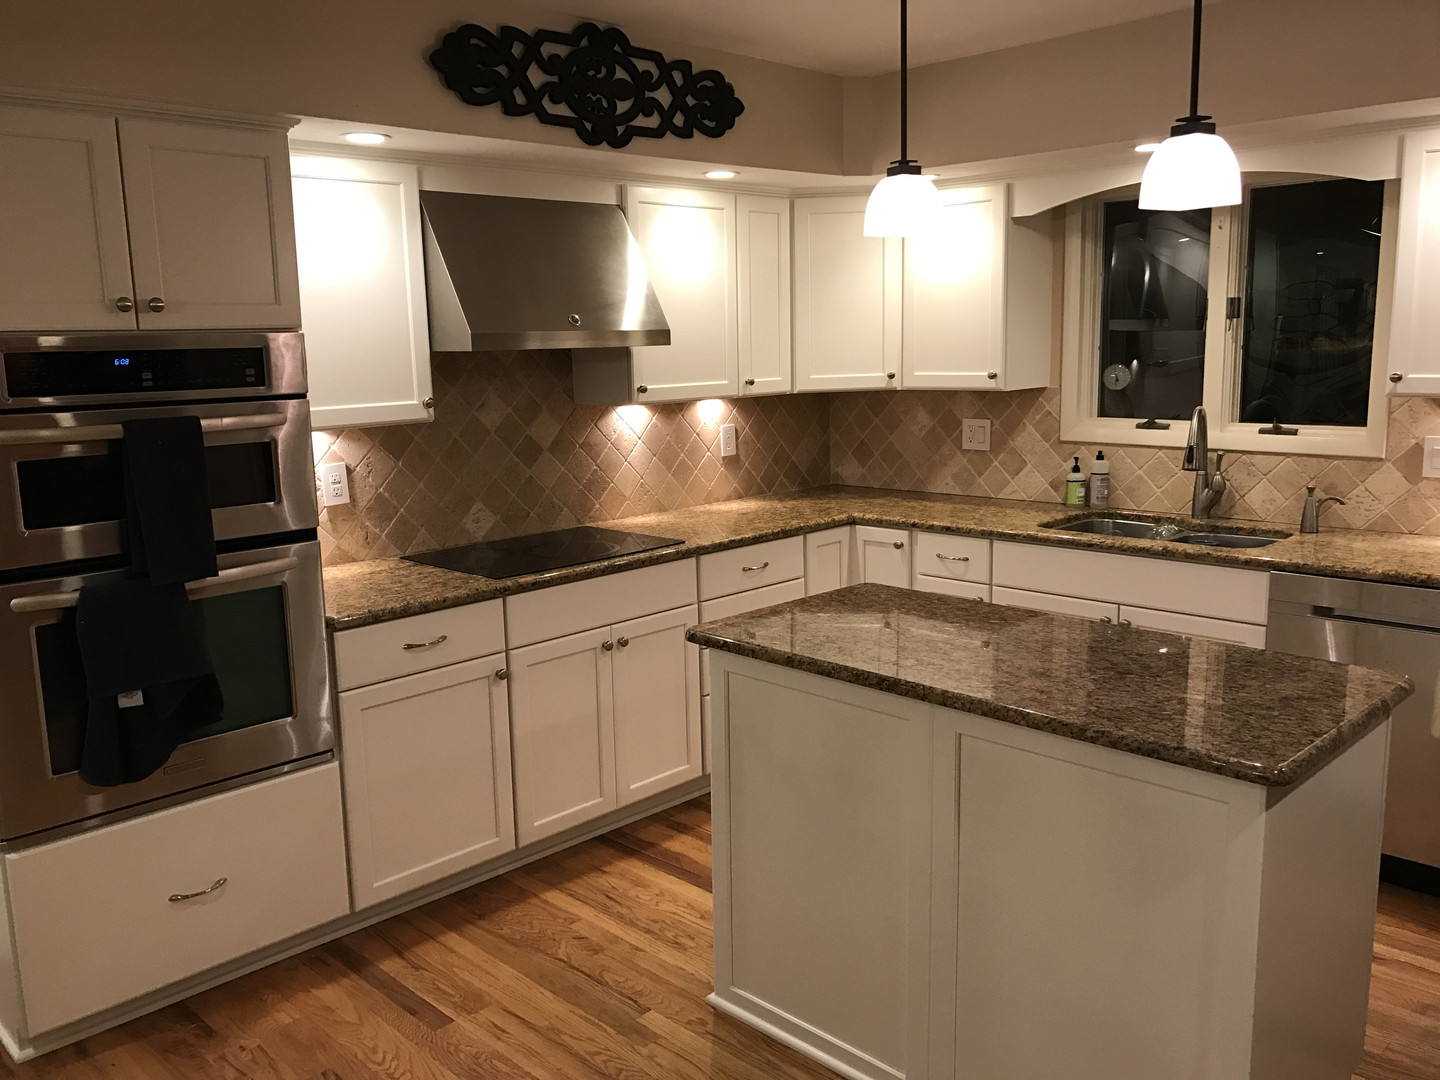 Kitchen Cabinets Syracuse Ny : Cabinet Solutions - If you need a new